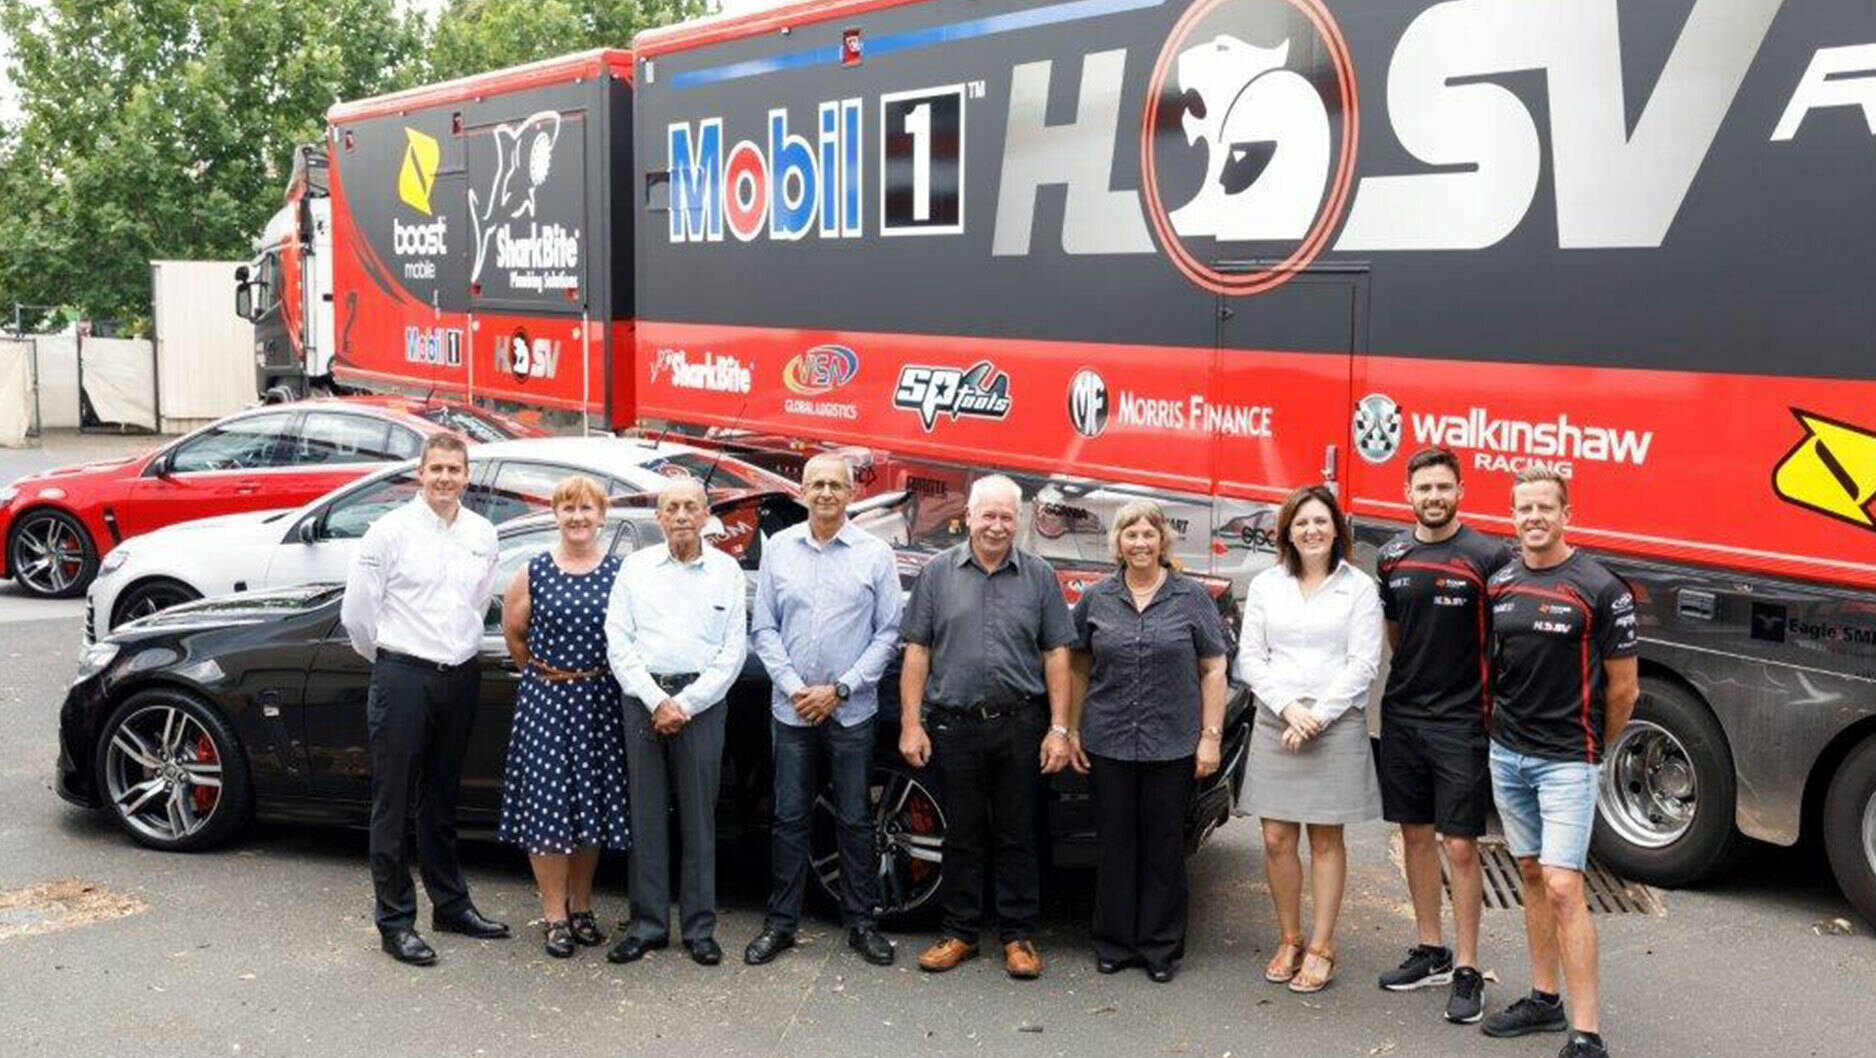 Image PhotoAsk for Mobilgrand prize winners Steve Williams and Neville Roesler (centre) are joined by ExxonMobil's Colin Smith and Christie Torwick EM and Mobil 1 HSV drivers Scott Pye and James Courtney.